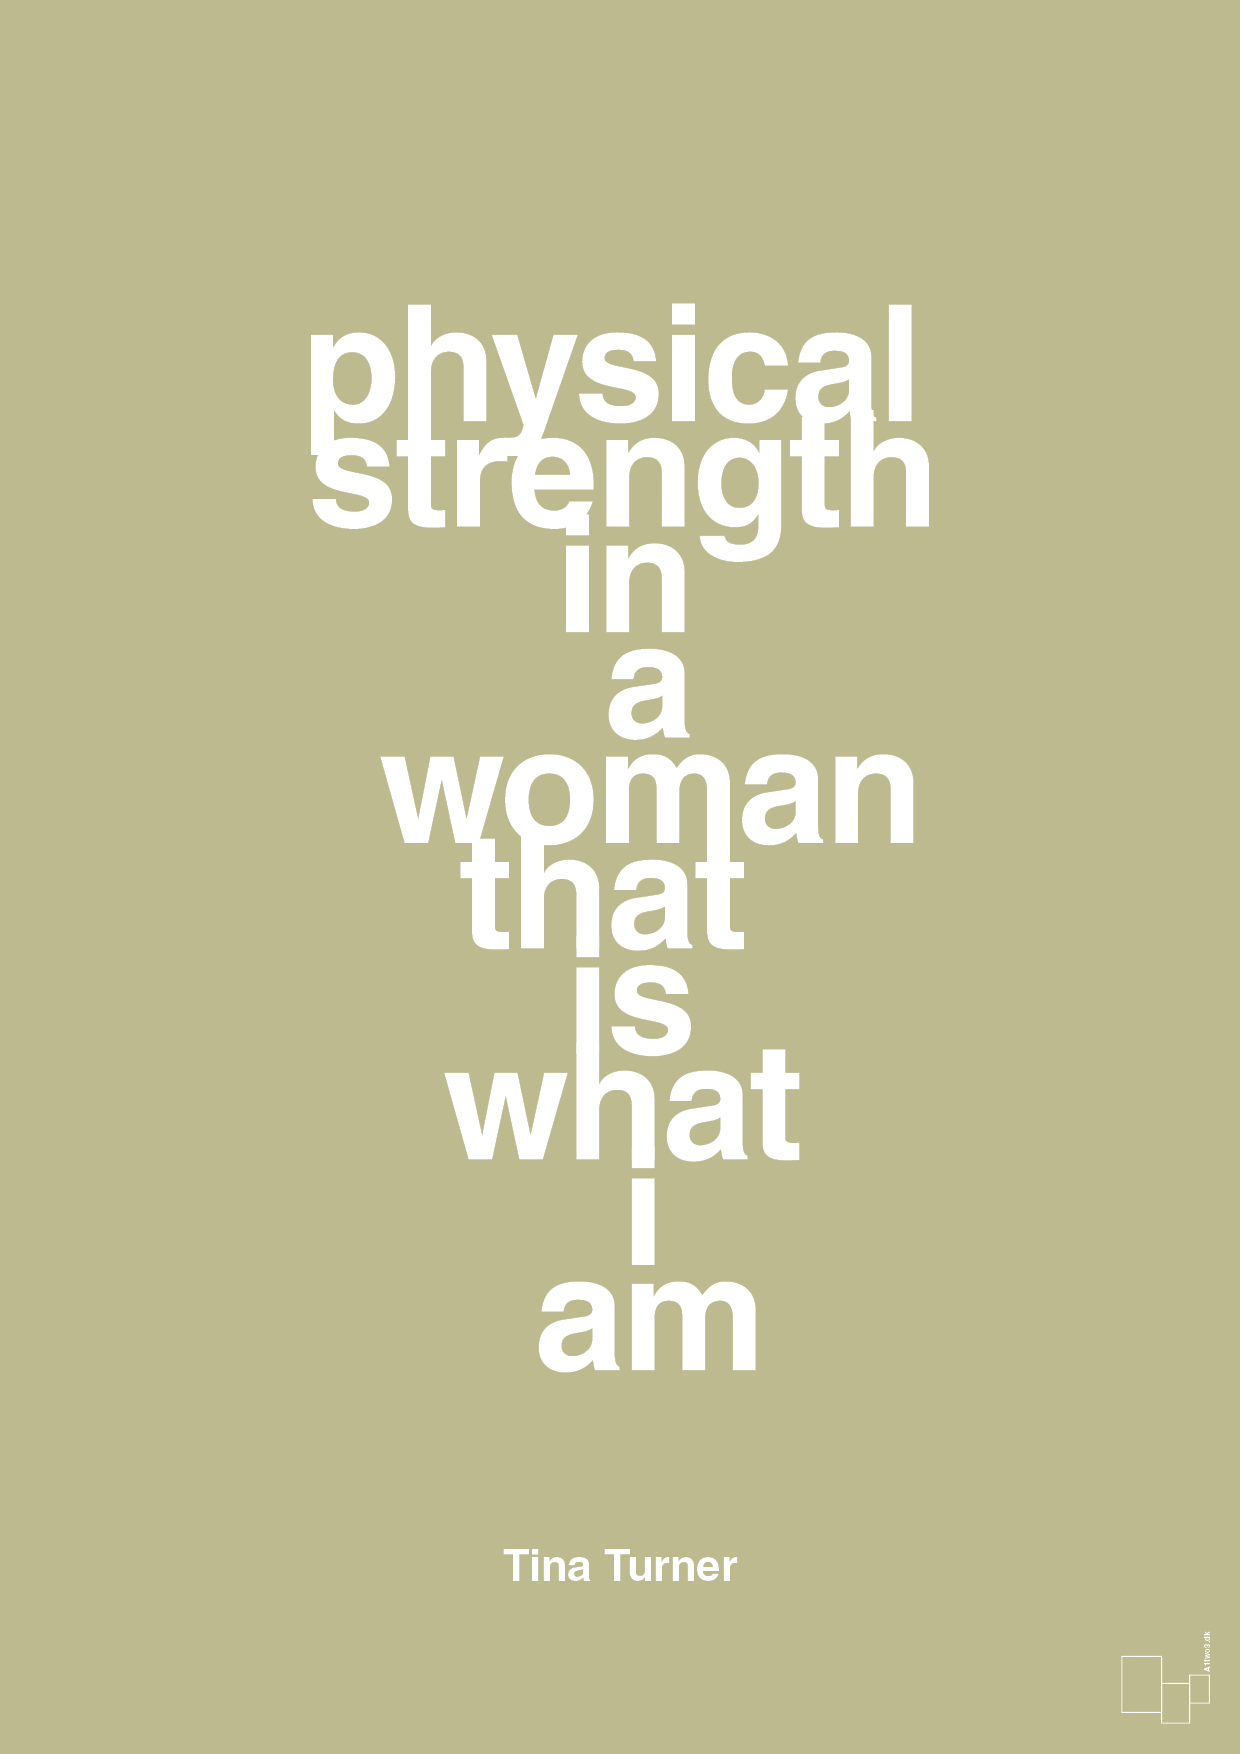 physical strength in a woman that’s what I am - Plakat med Citater i Back to Nature